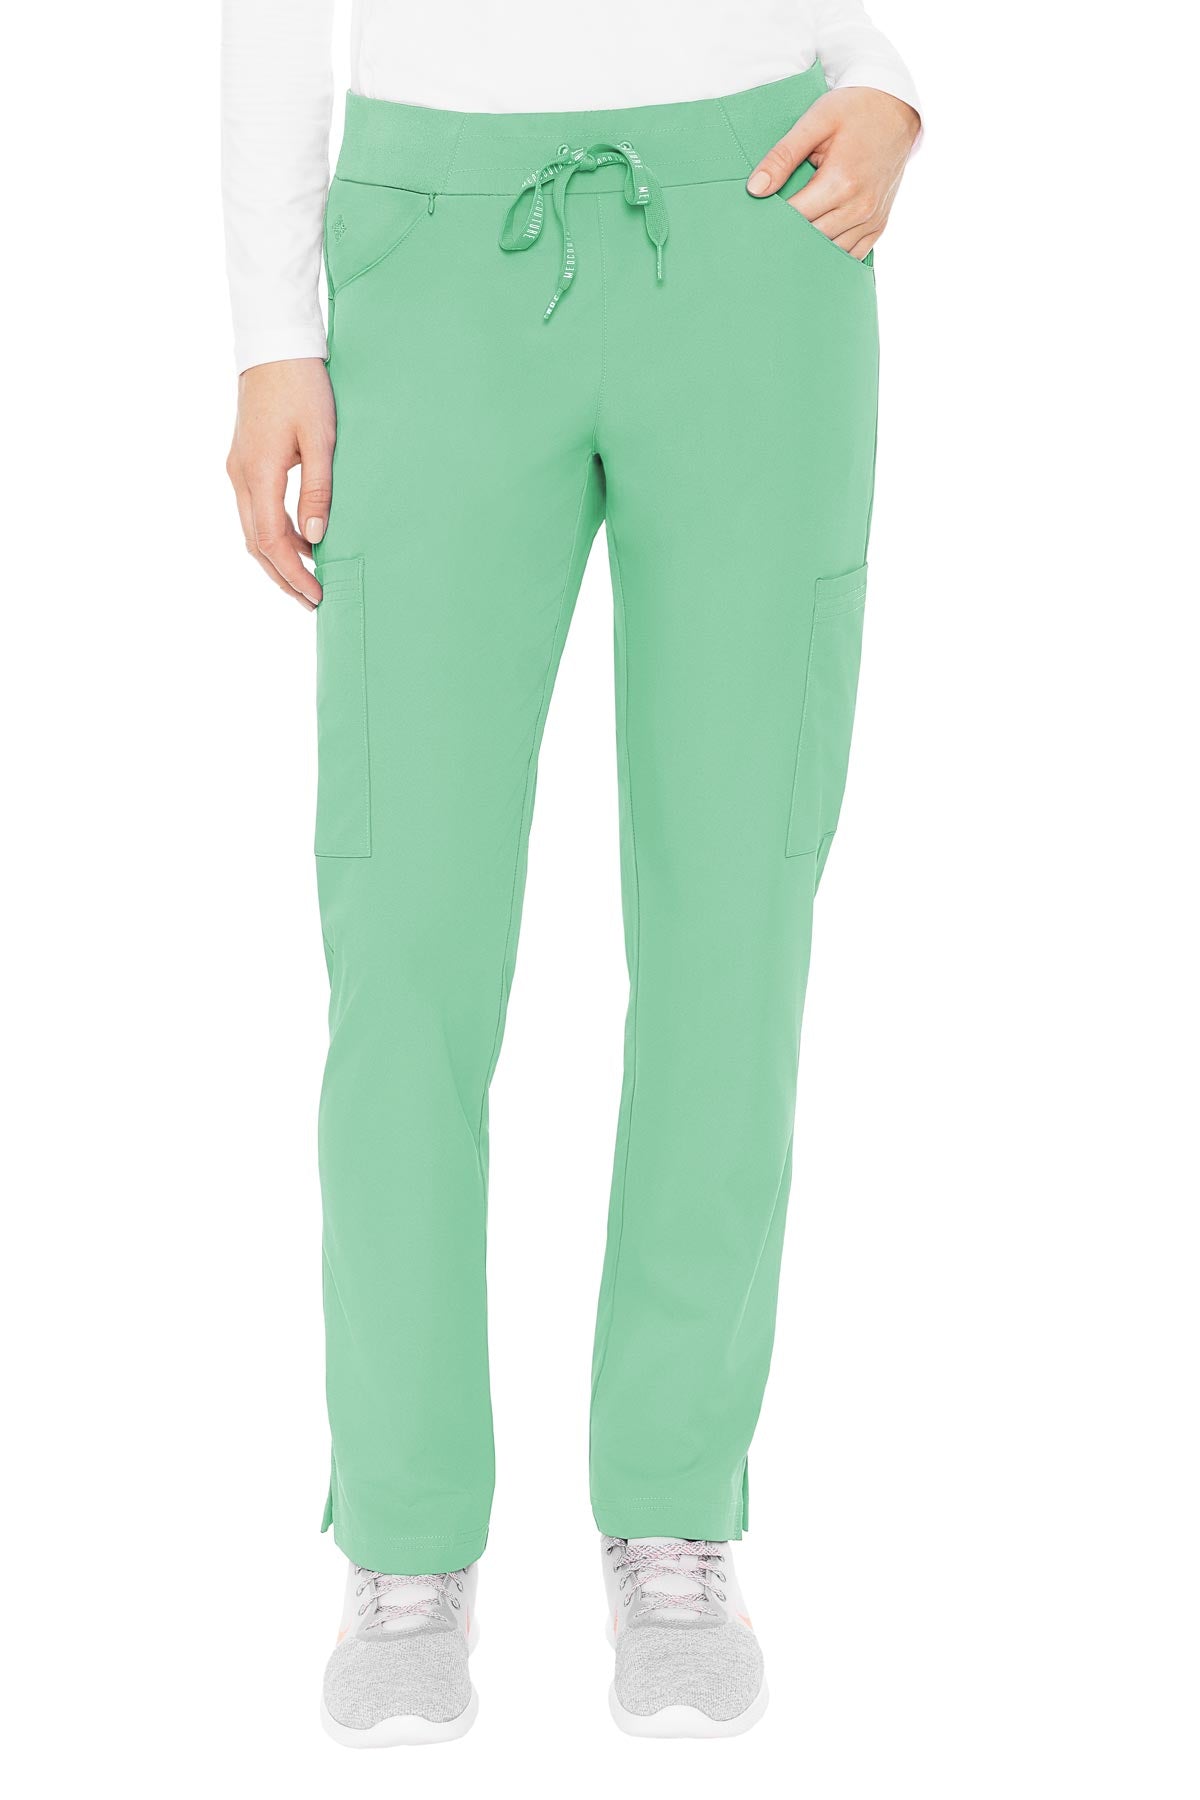 Med Couture Peaches Scoop Pocket Pant Regular Length (XS-3XL)